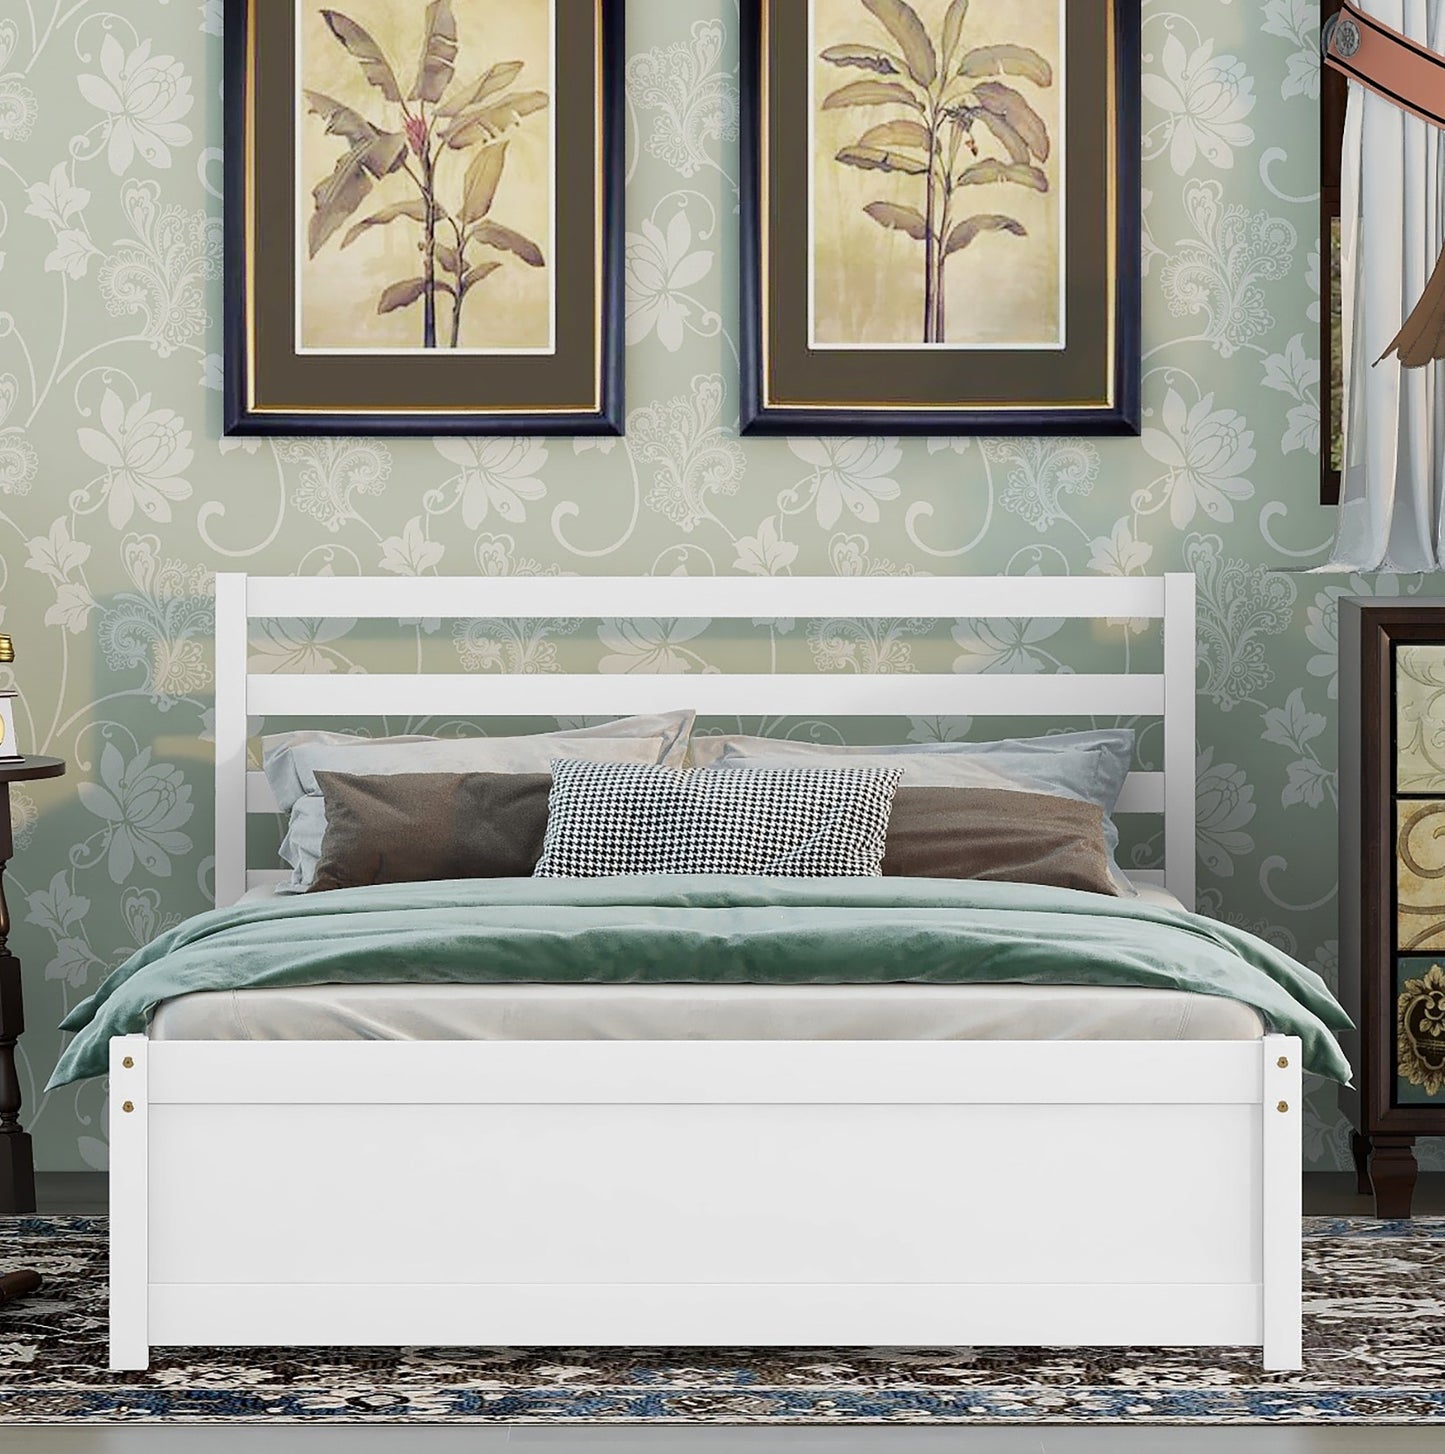 Syngar King Size Platform Bed with Headboard, Solid Wood Frame with Headboard, 500 Lbs. Weight Capacity, White, LJ2093